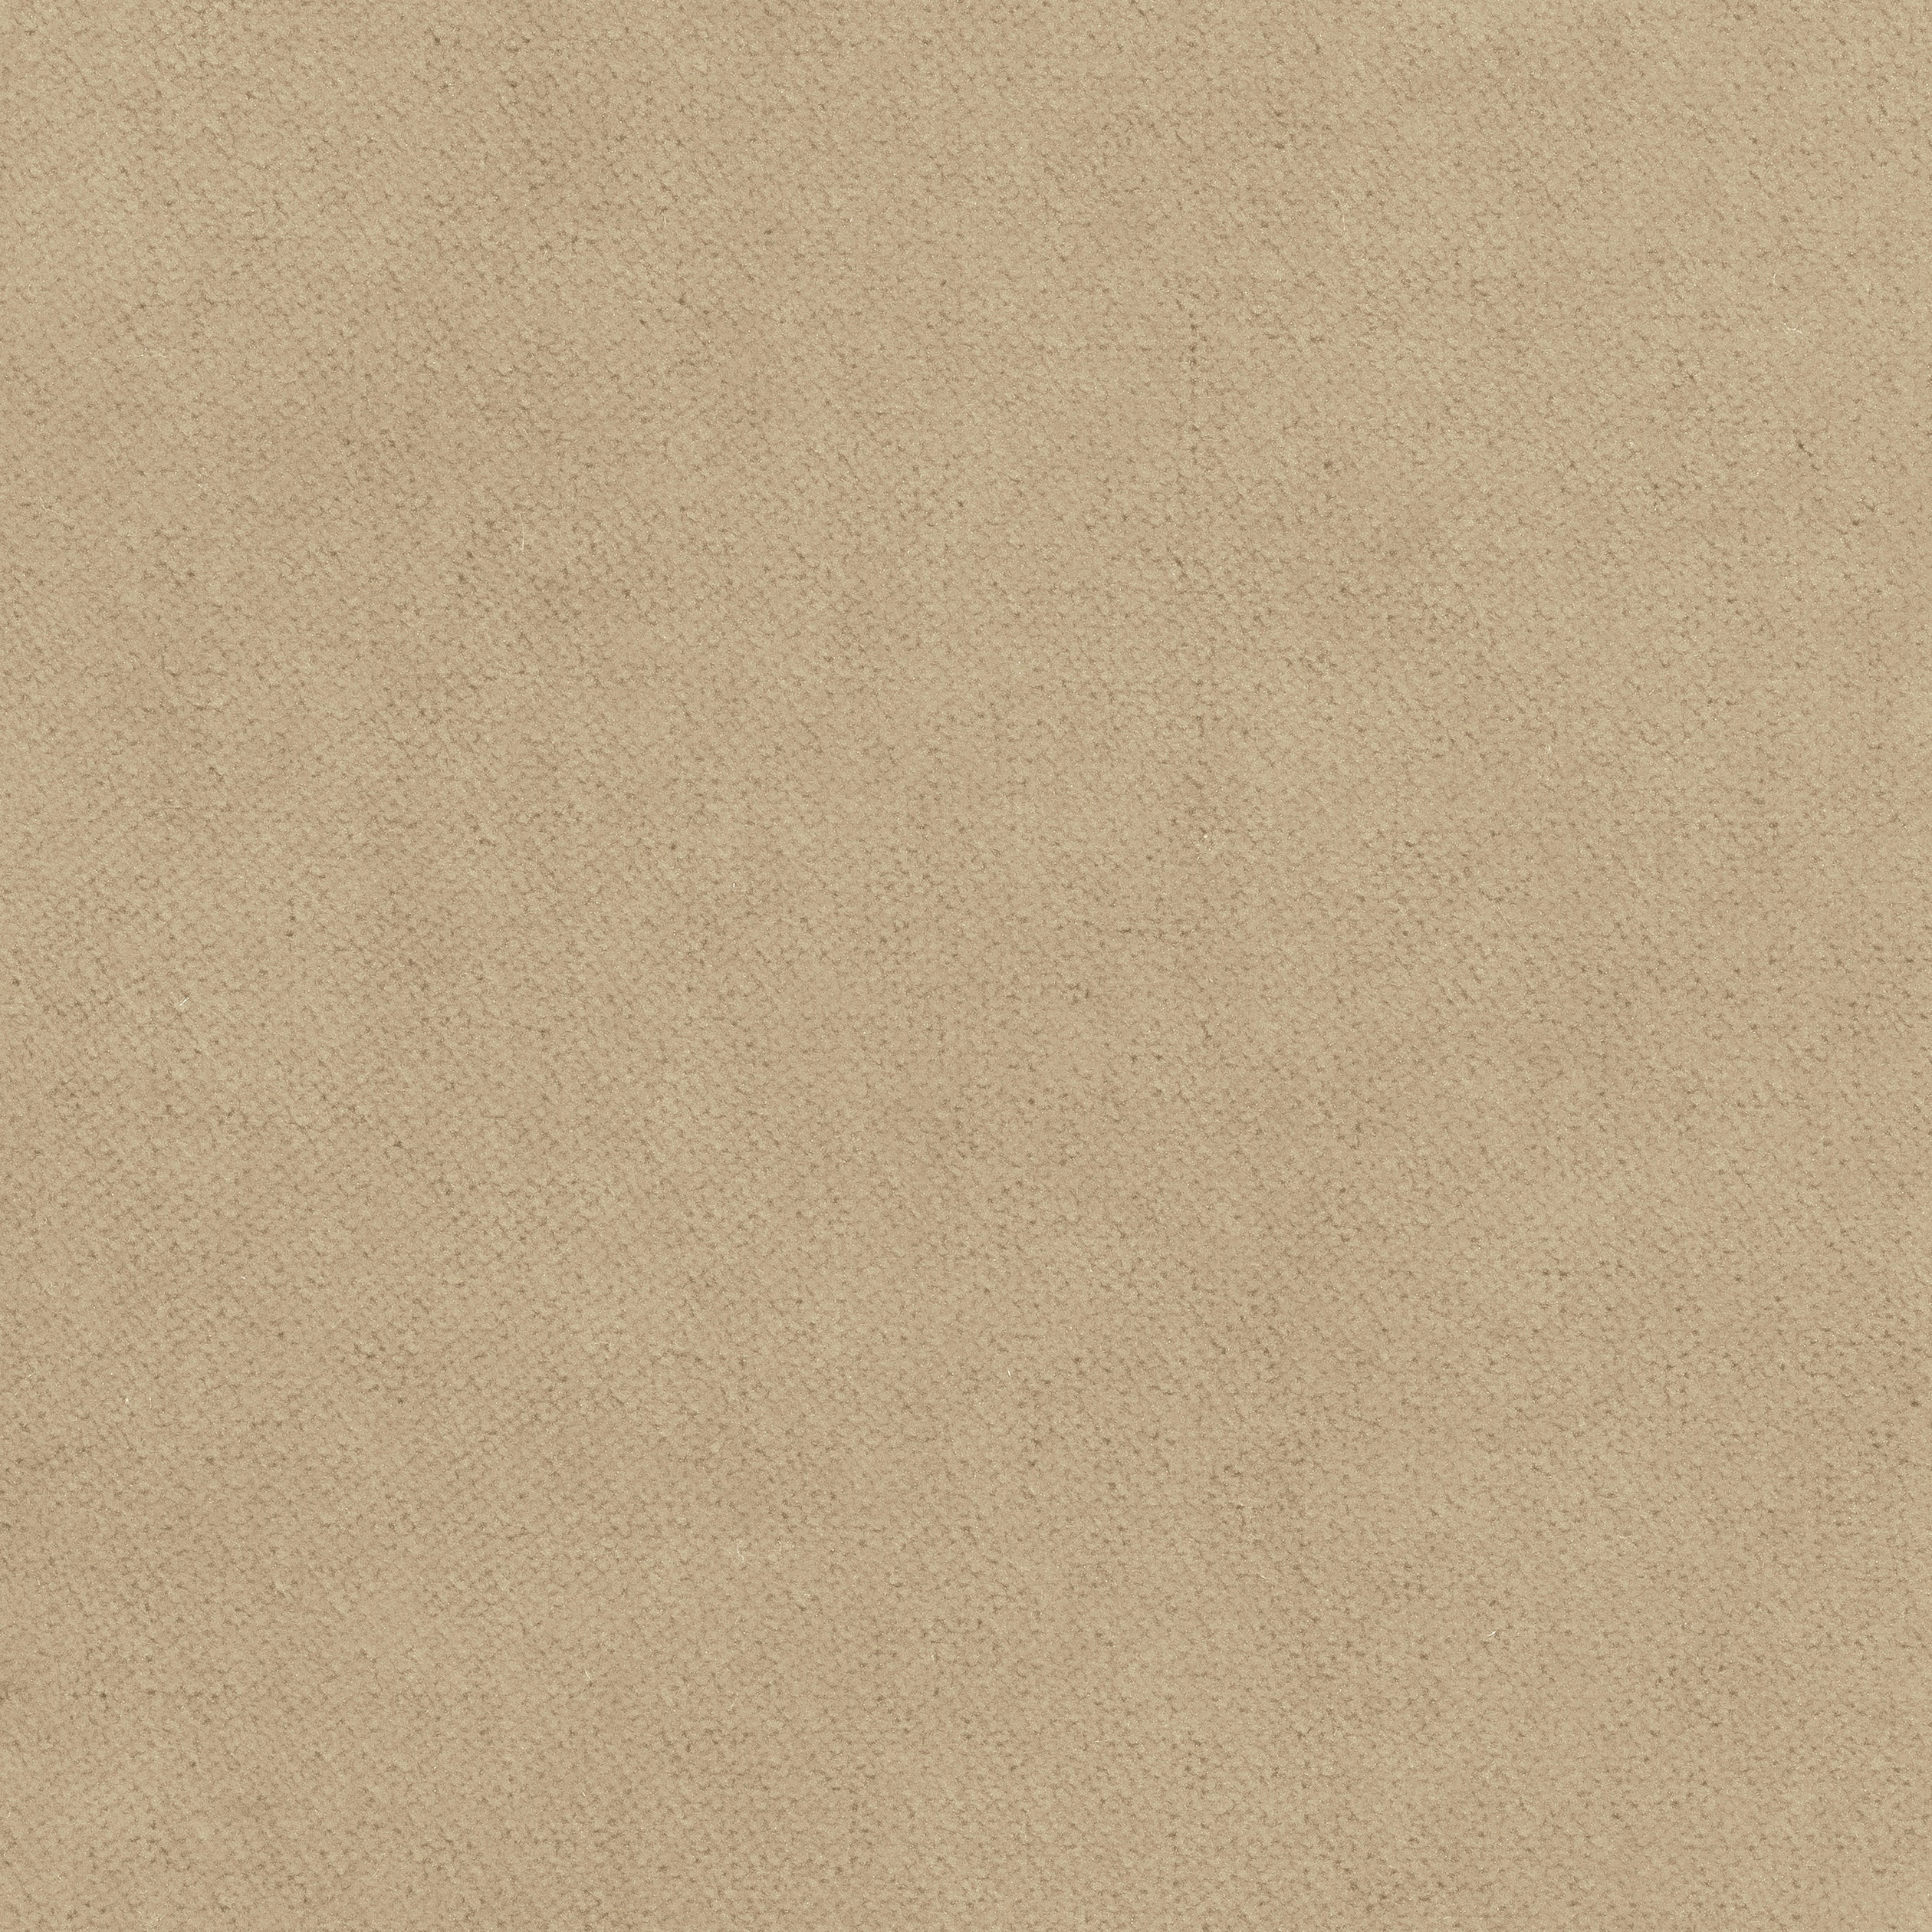 Club Velvet fabric in sand color - pattern number W7231 - by Thibaut in the Club Velvet collection